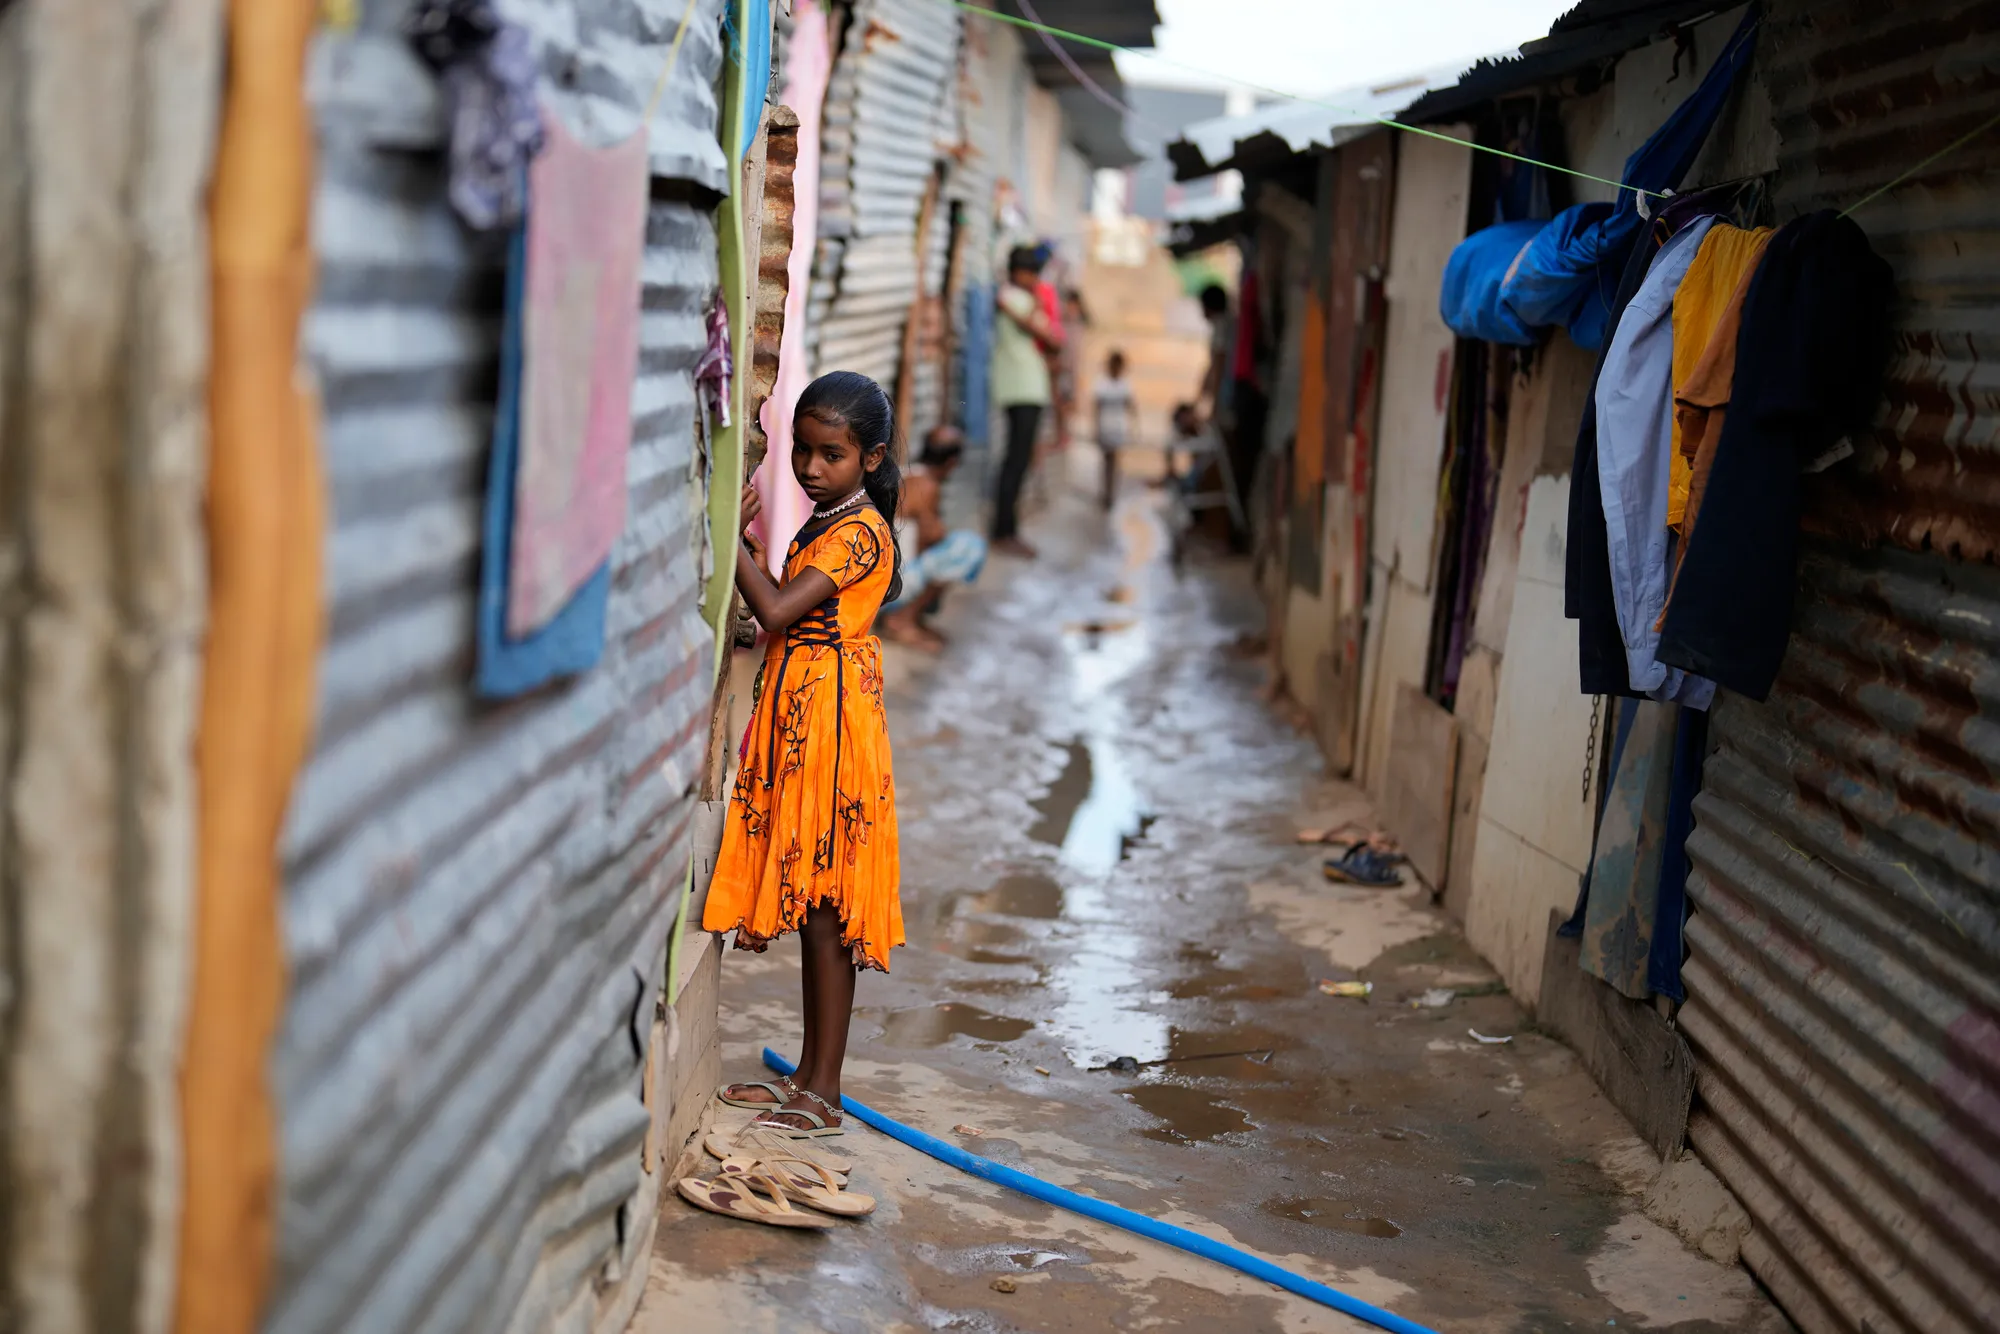 Jerifa Islam stands outside her home on 20 July 2022 in a poor neighborhood in Bengaluru, India, where her family relocated after flooding in 2019 pushed them from their Himalayan village. Photo: Aijaz Rahi / AP Photo